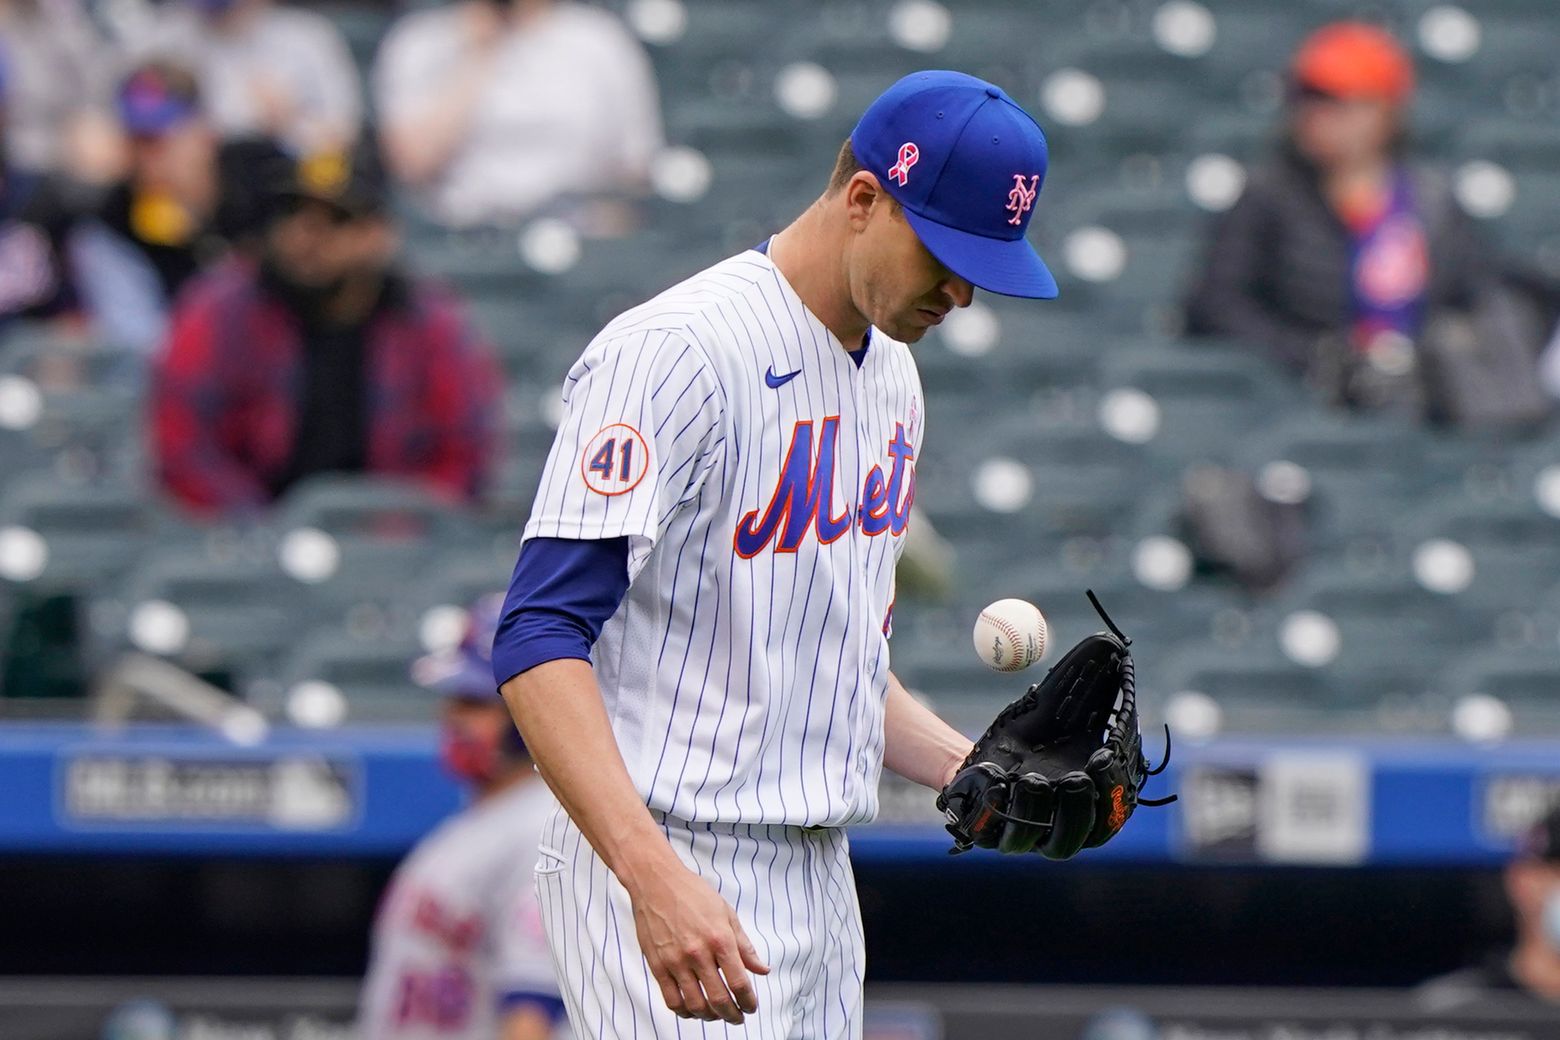 Mets pitchers off to historic start despite Jacob deGrom's injury